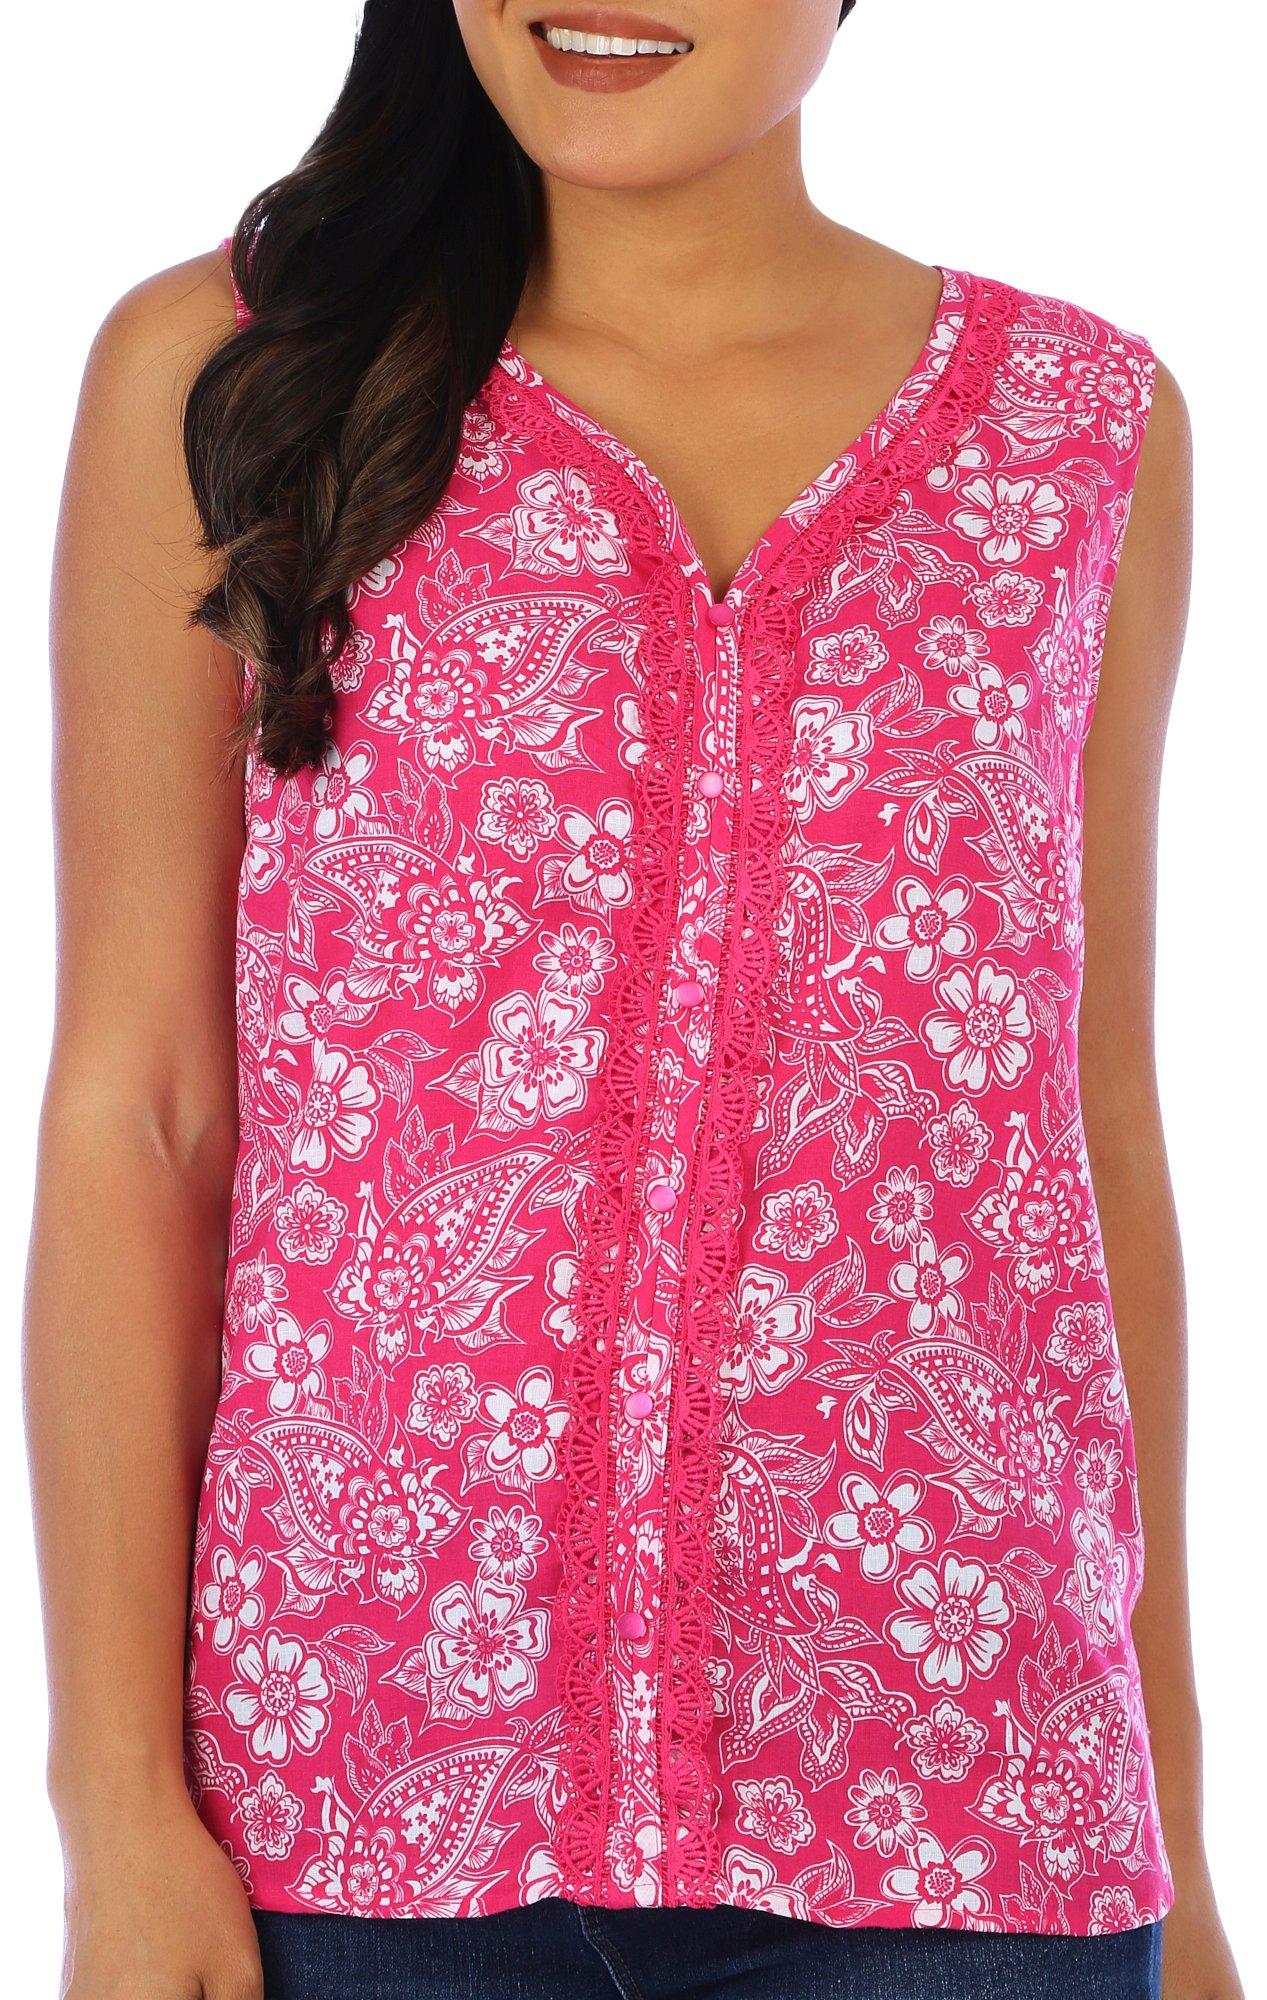 Coral Bay Womens Floral Print Button Down Sleeveless Top